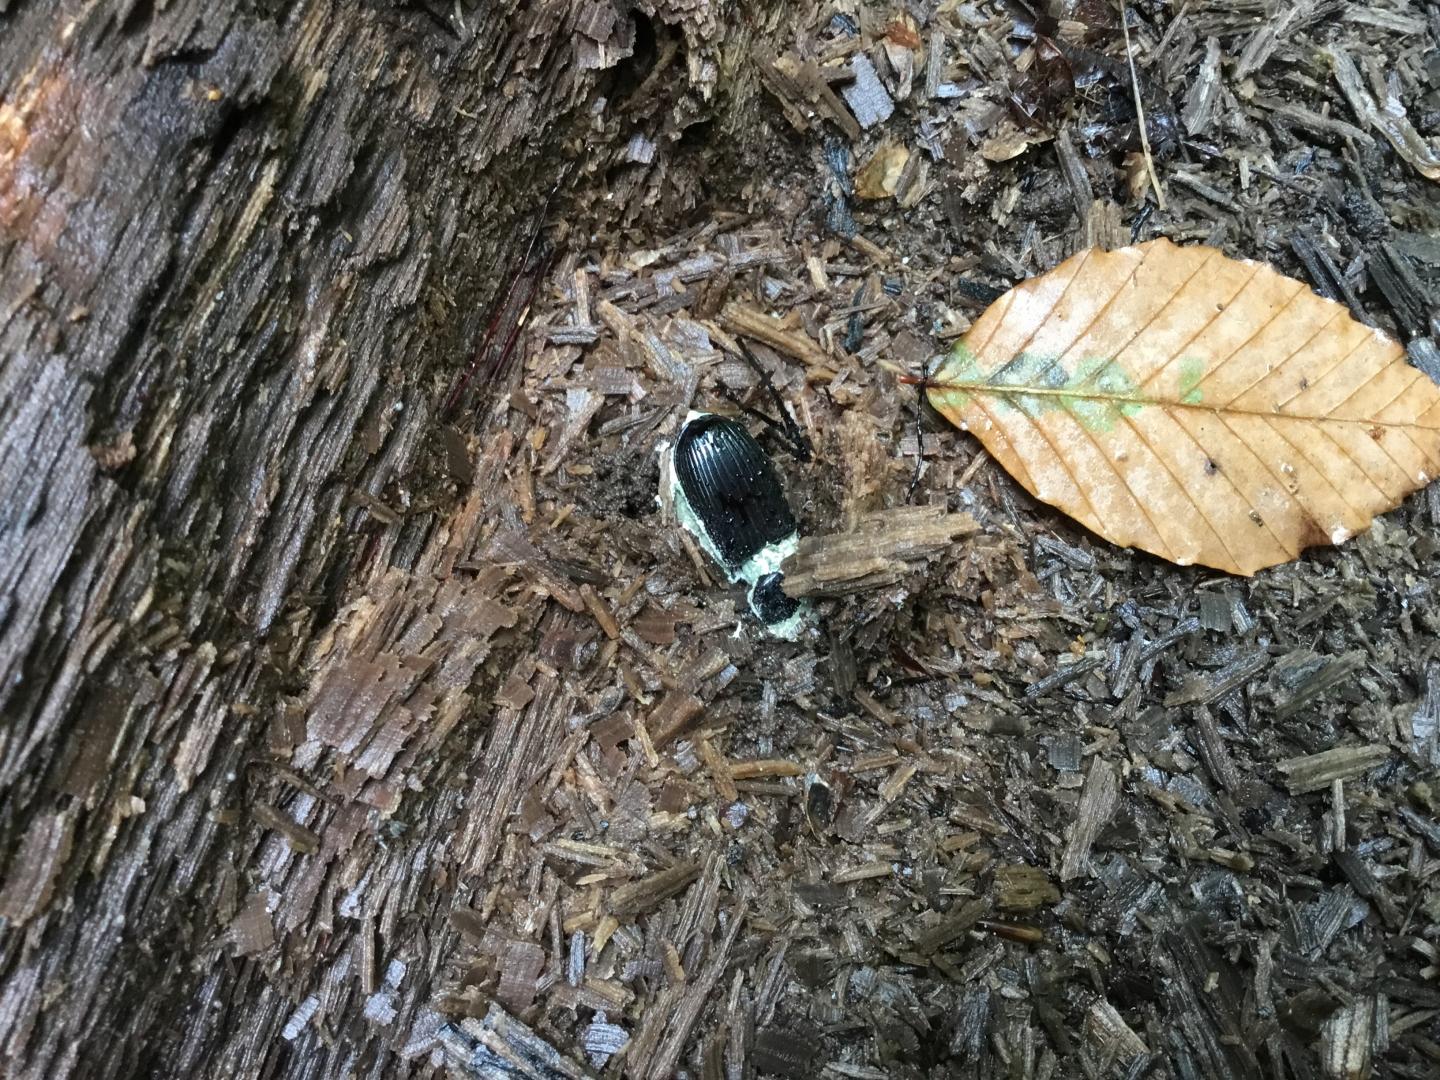 Dead beetle infected with pathogenic fungus